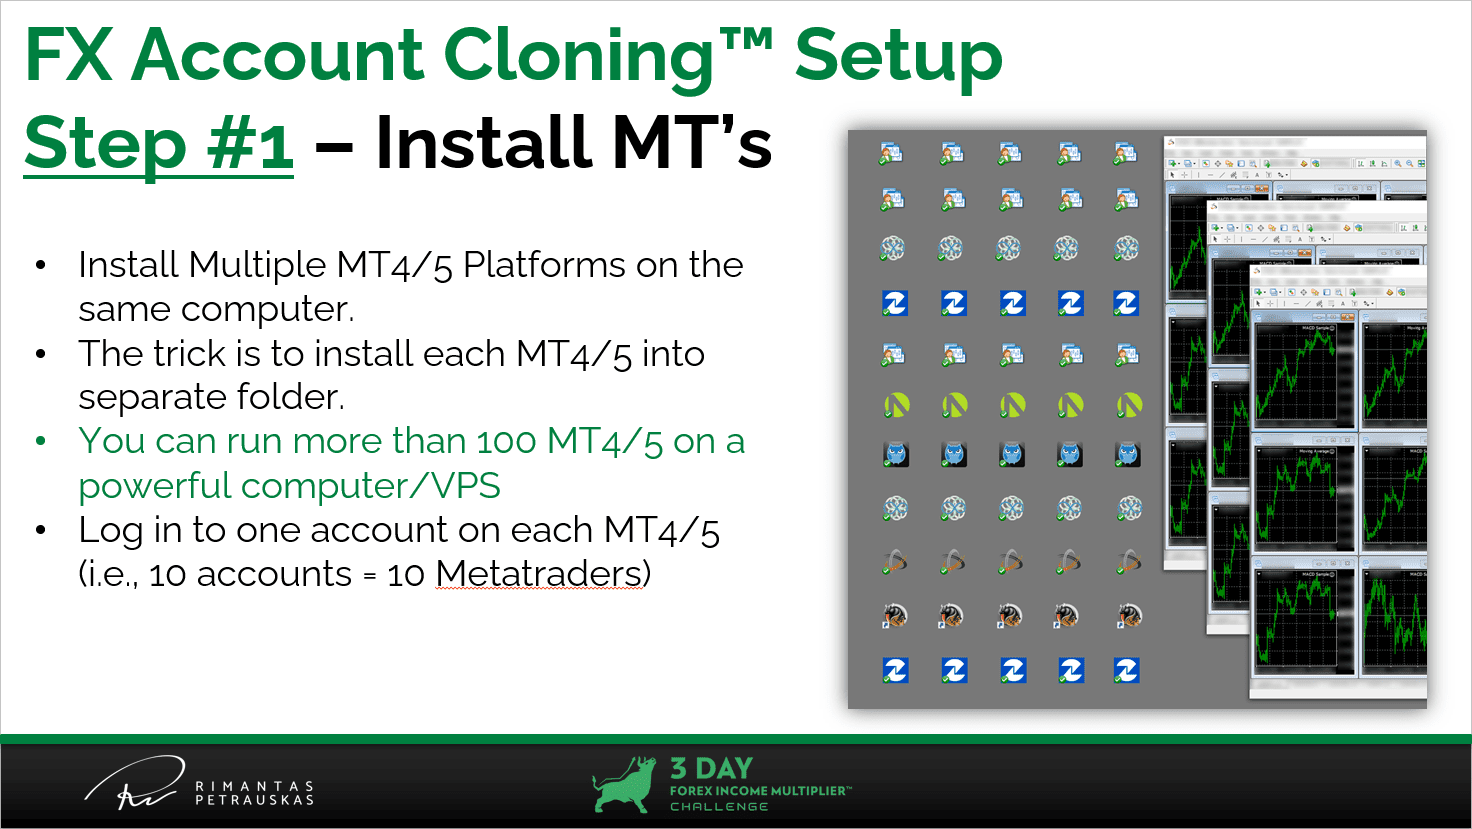 Setting up FX Account Cloning™: Step 1